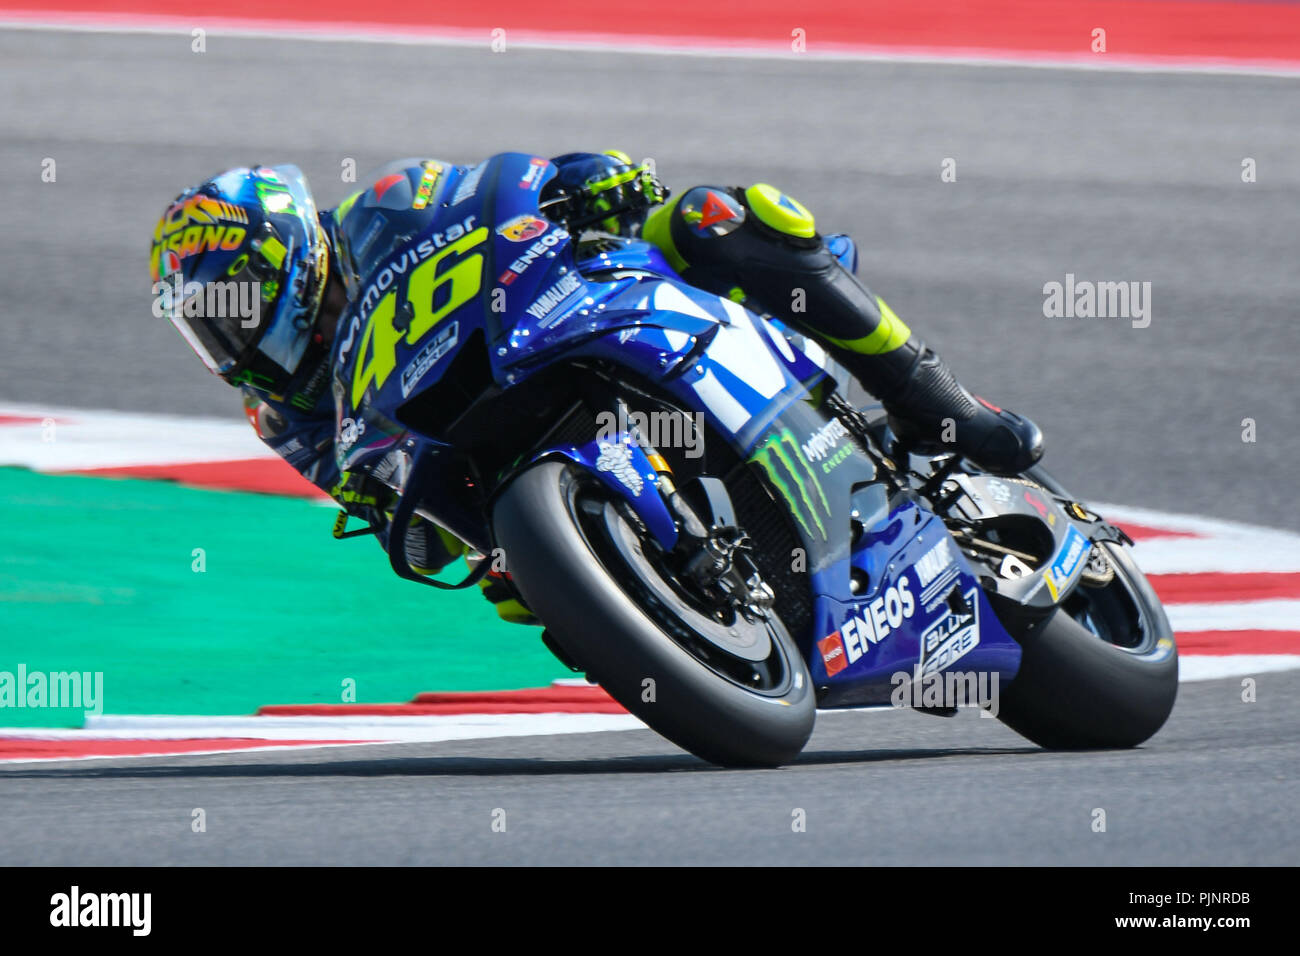 Rimini, Italy. 7th September 2018. Valentino Rossi of Italy and Movistar Yamaha MotoGP in action during the qualifying of San Marino della Riviera di Rimini at the World Circuit Marco